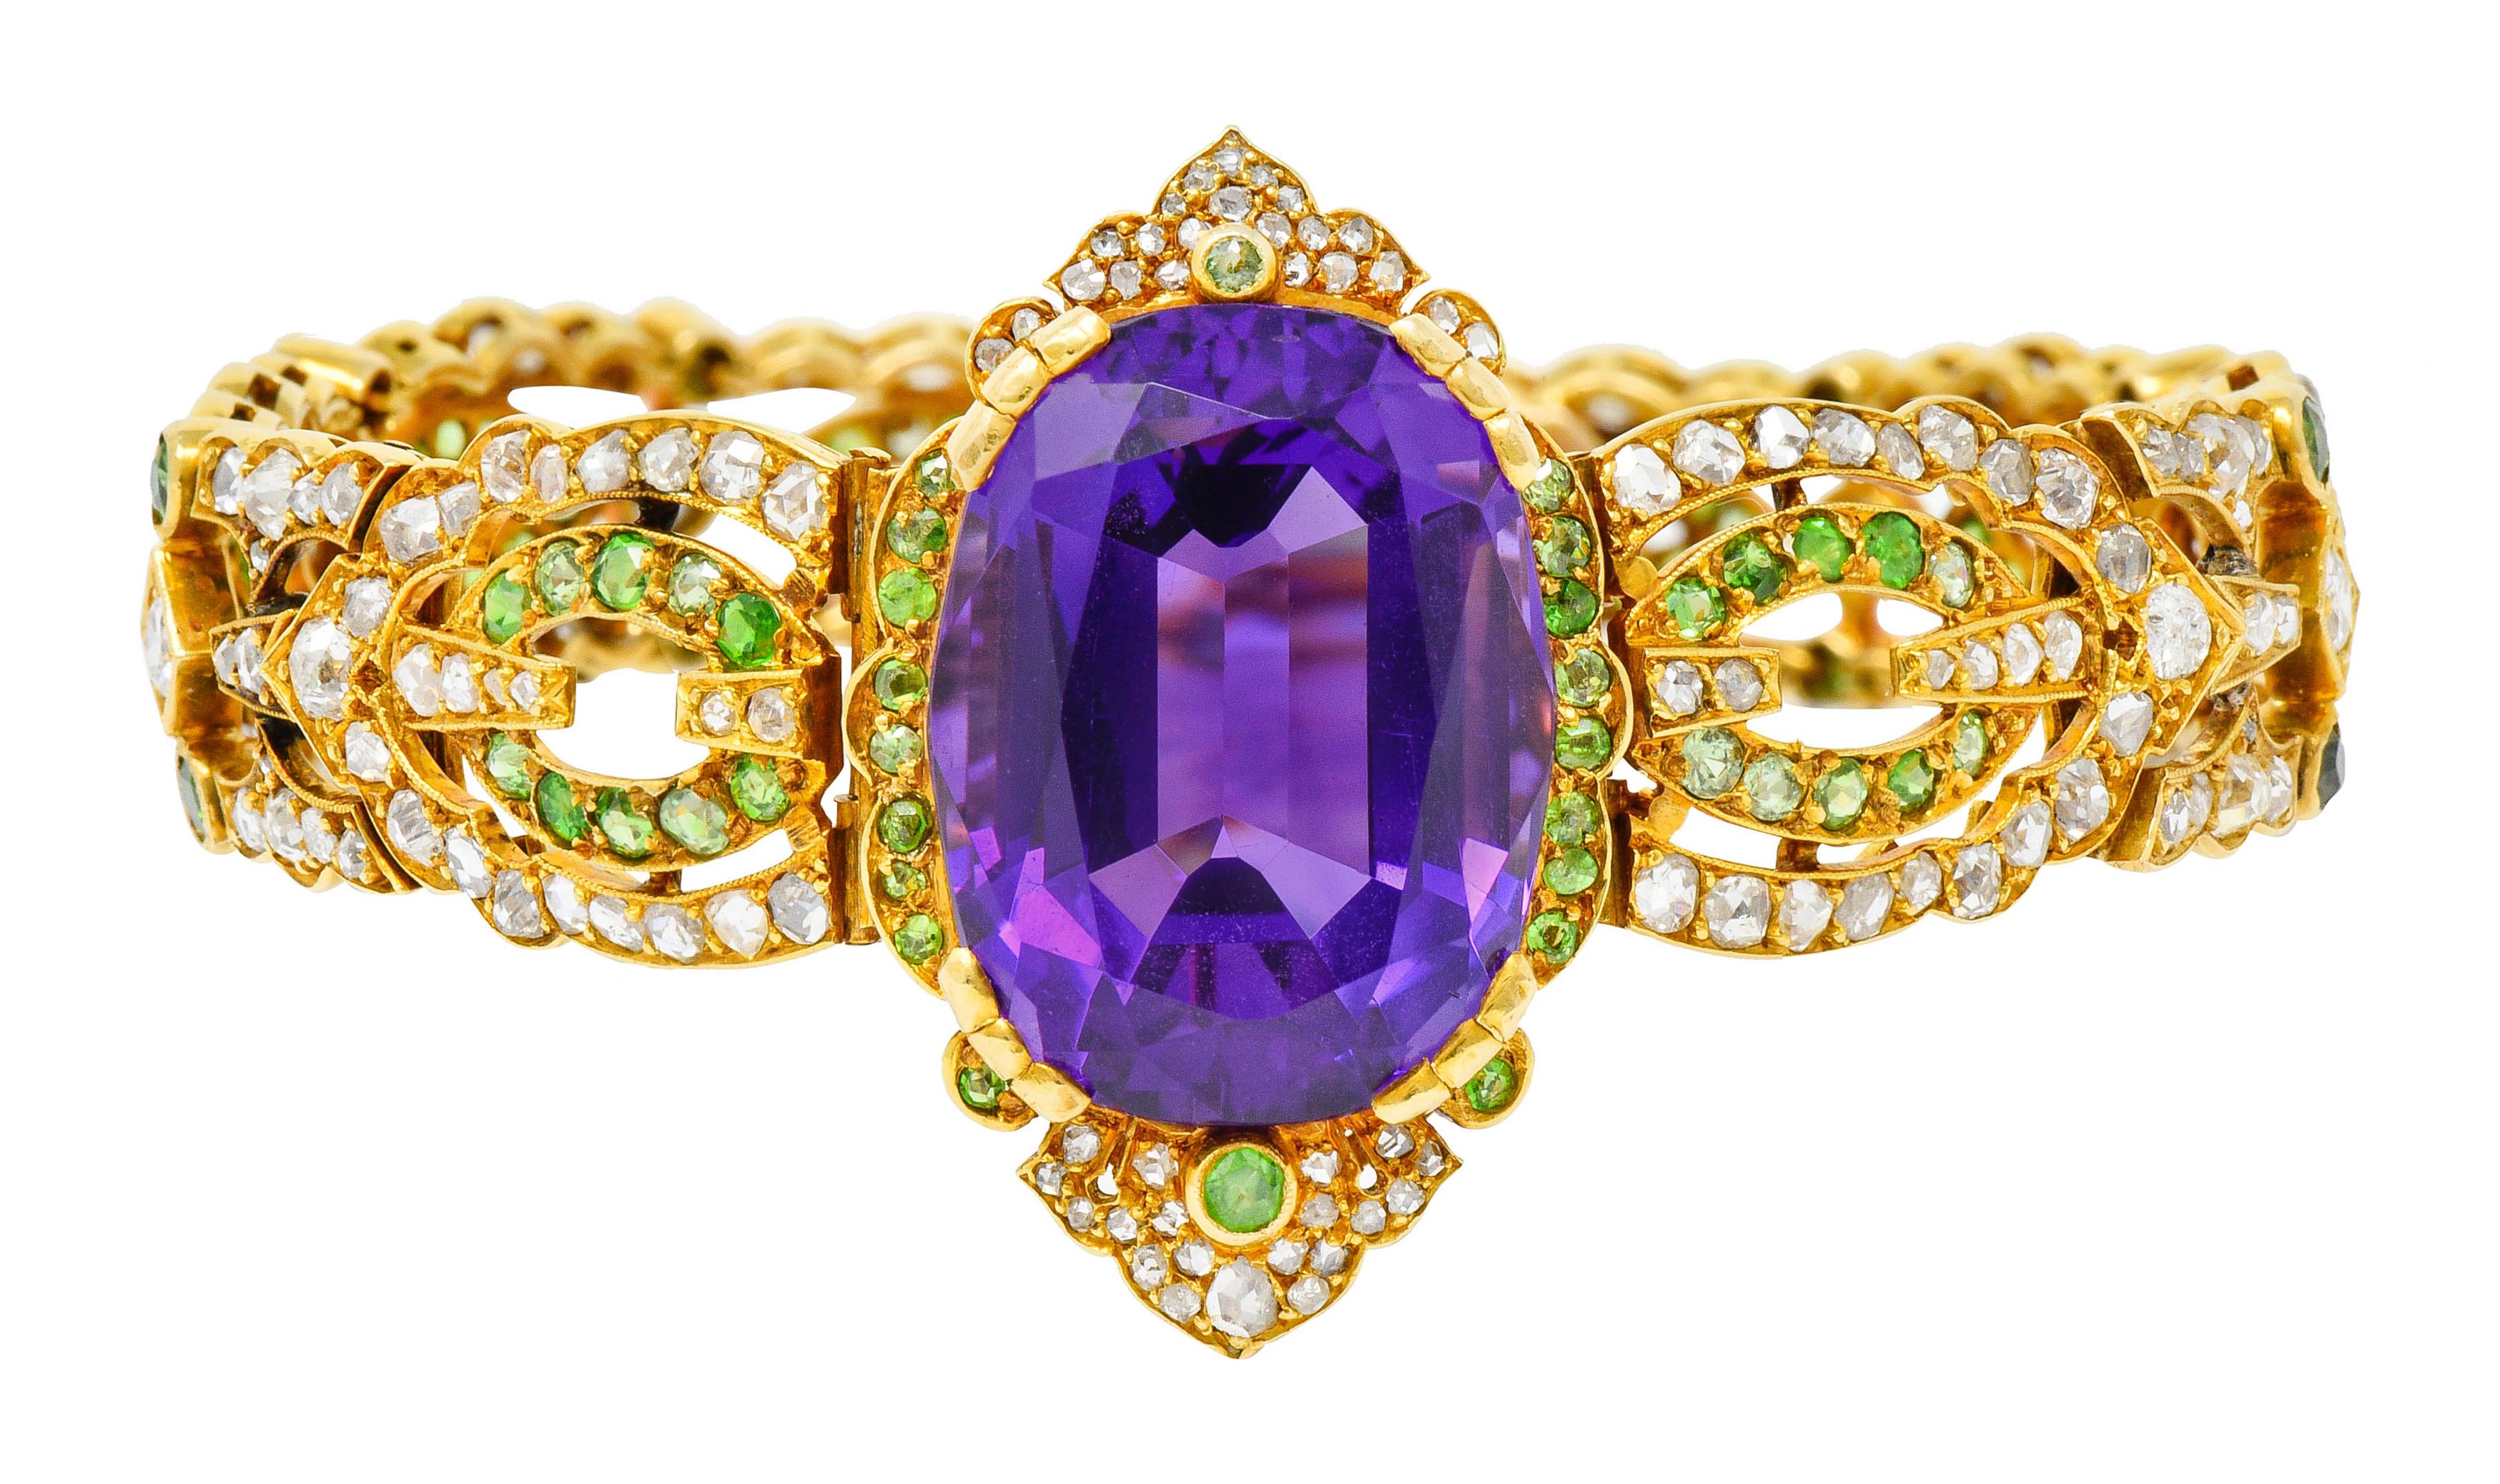 Link style bracelet with scalloped edges and a pierced navette design accented throughout by demantoid garnets and diamonds

Centering an oval cut amethyst measuring approximately 21.5 x 16.8 mm; transparent and robustly purple

Round cut demantoid